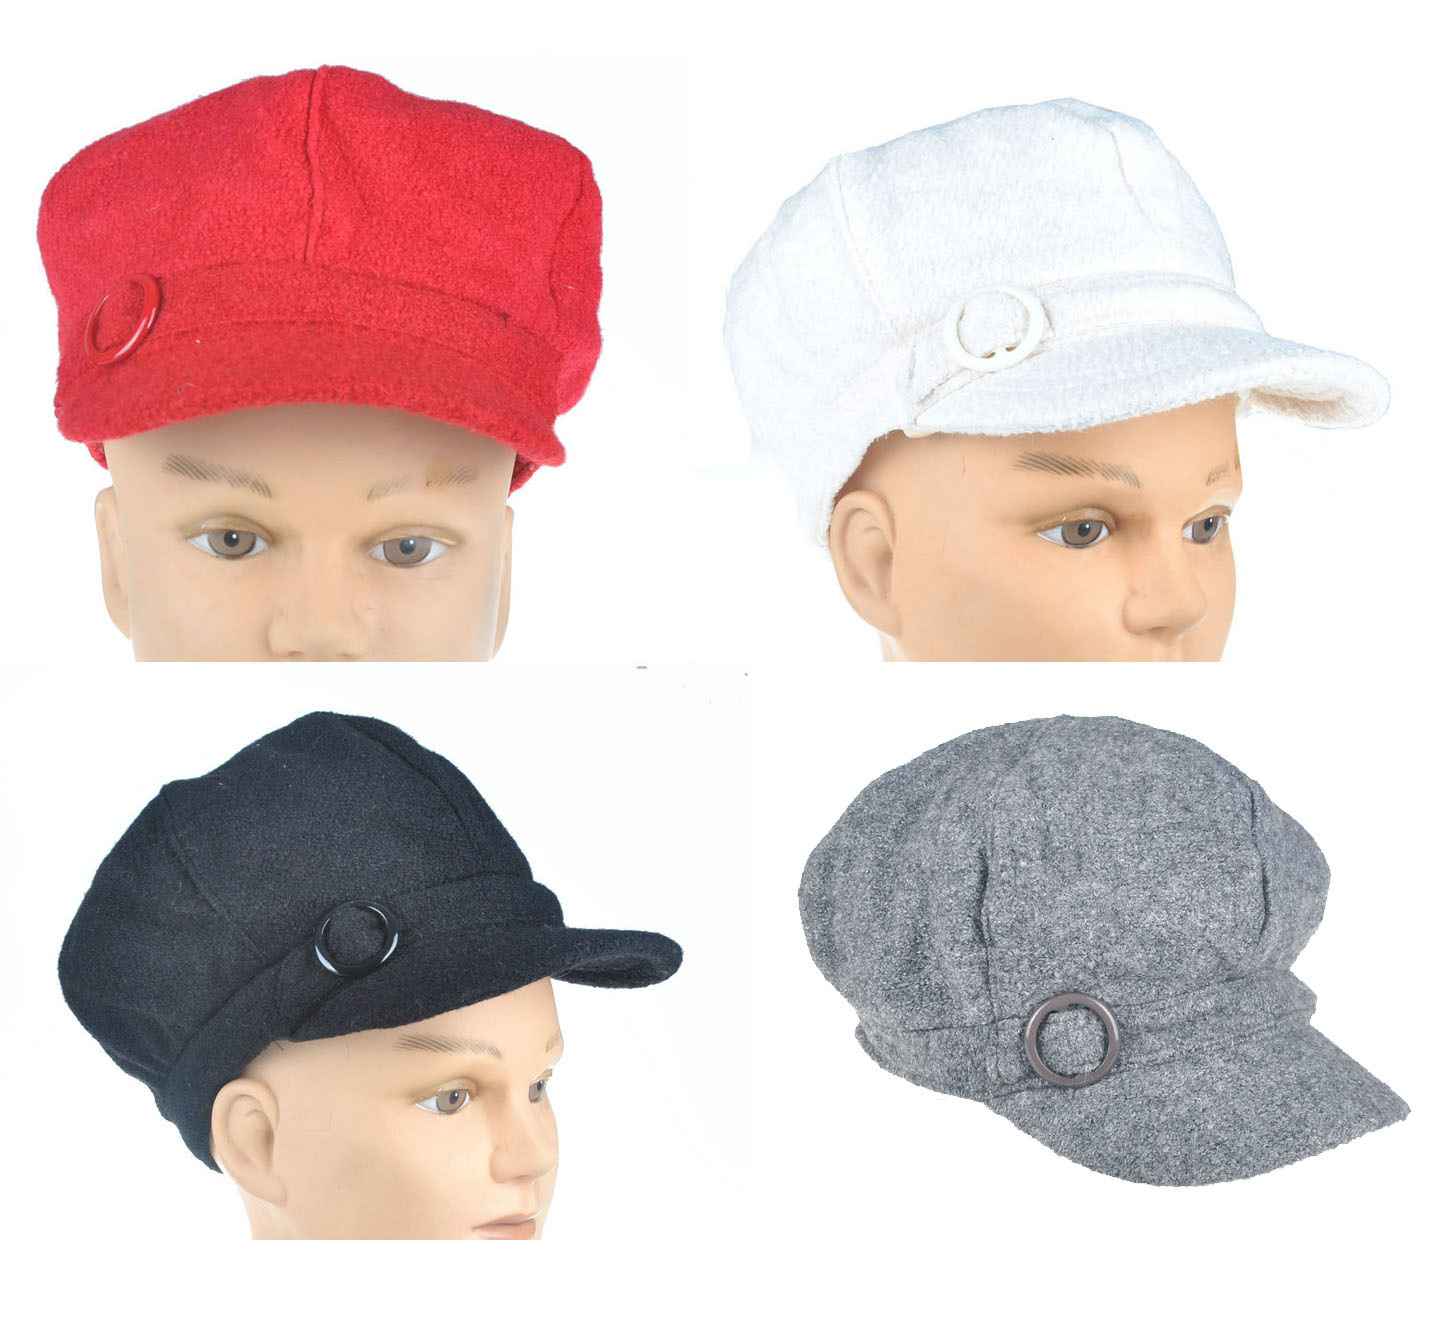 Millinery women's casual cap hat cap winter shopping thermal